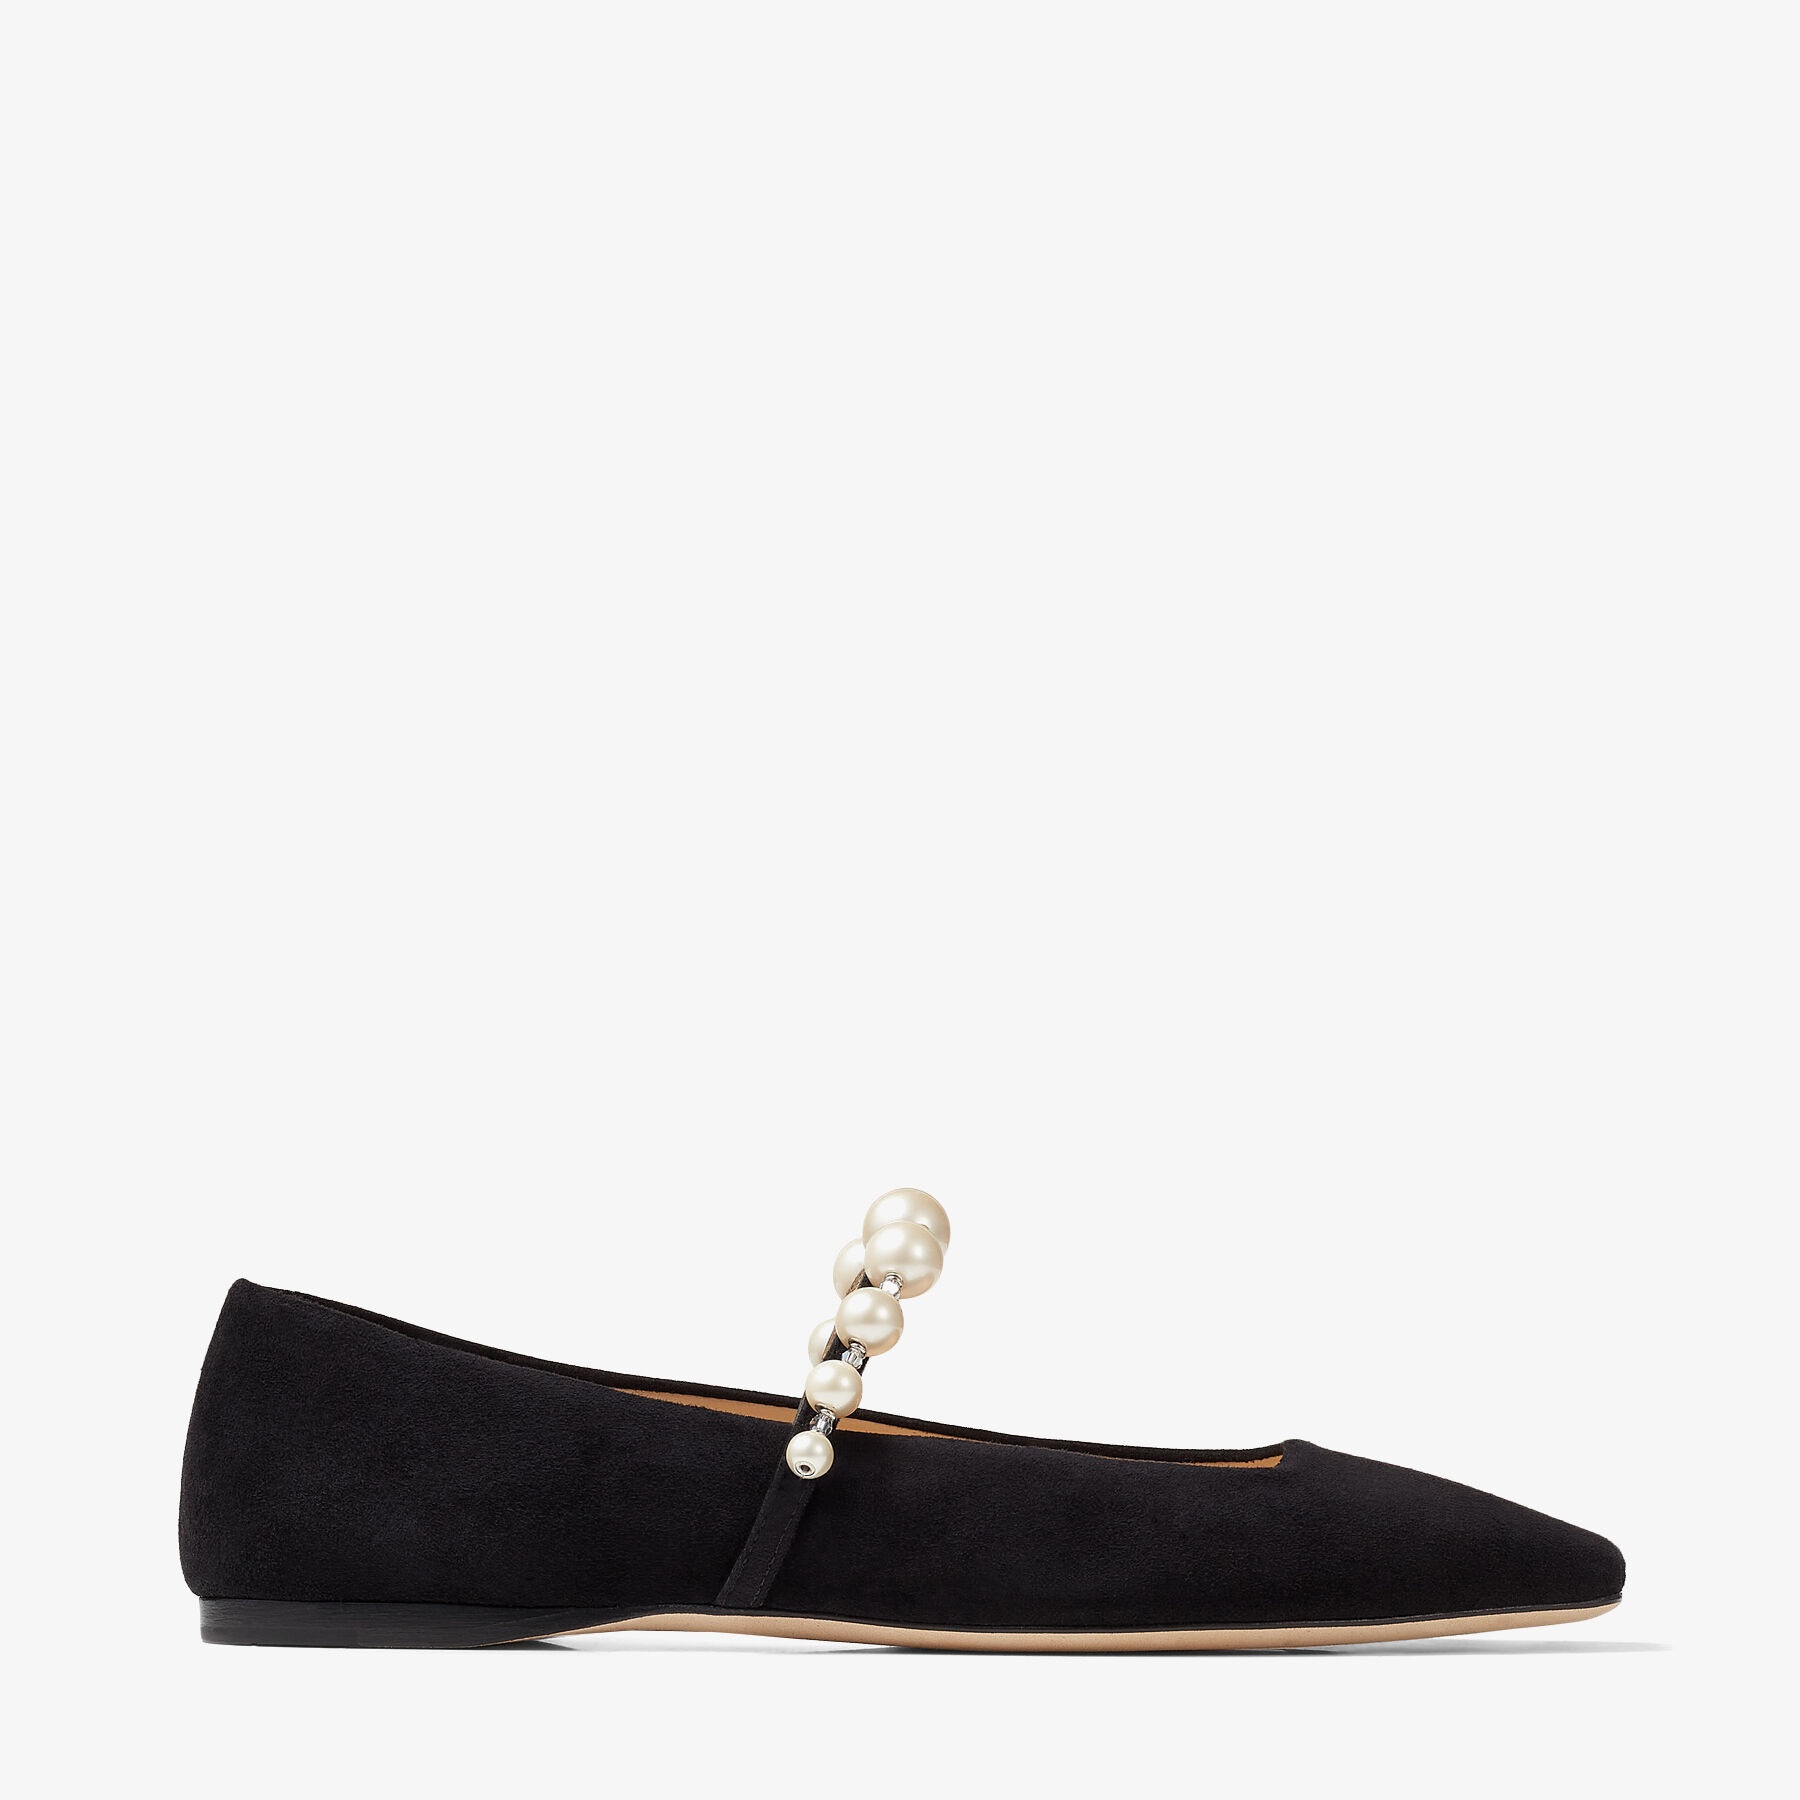 Ade Flat
Black Suede Flats with Pearl Embellishment - 1